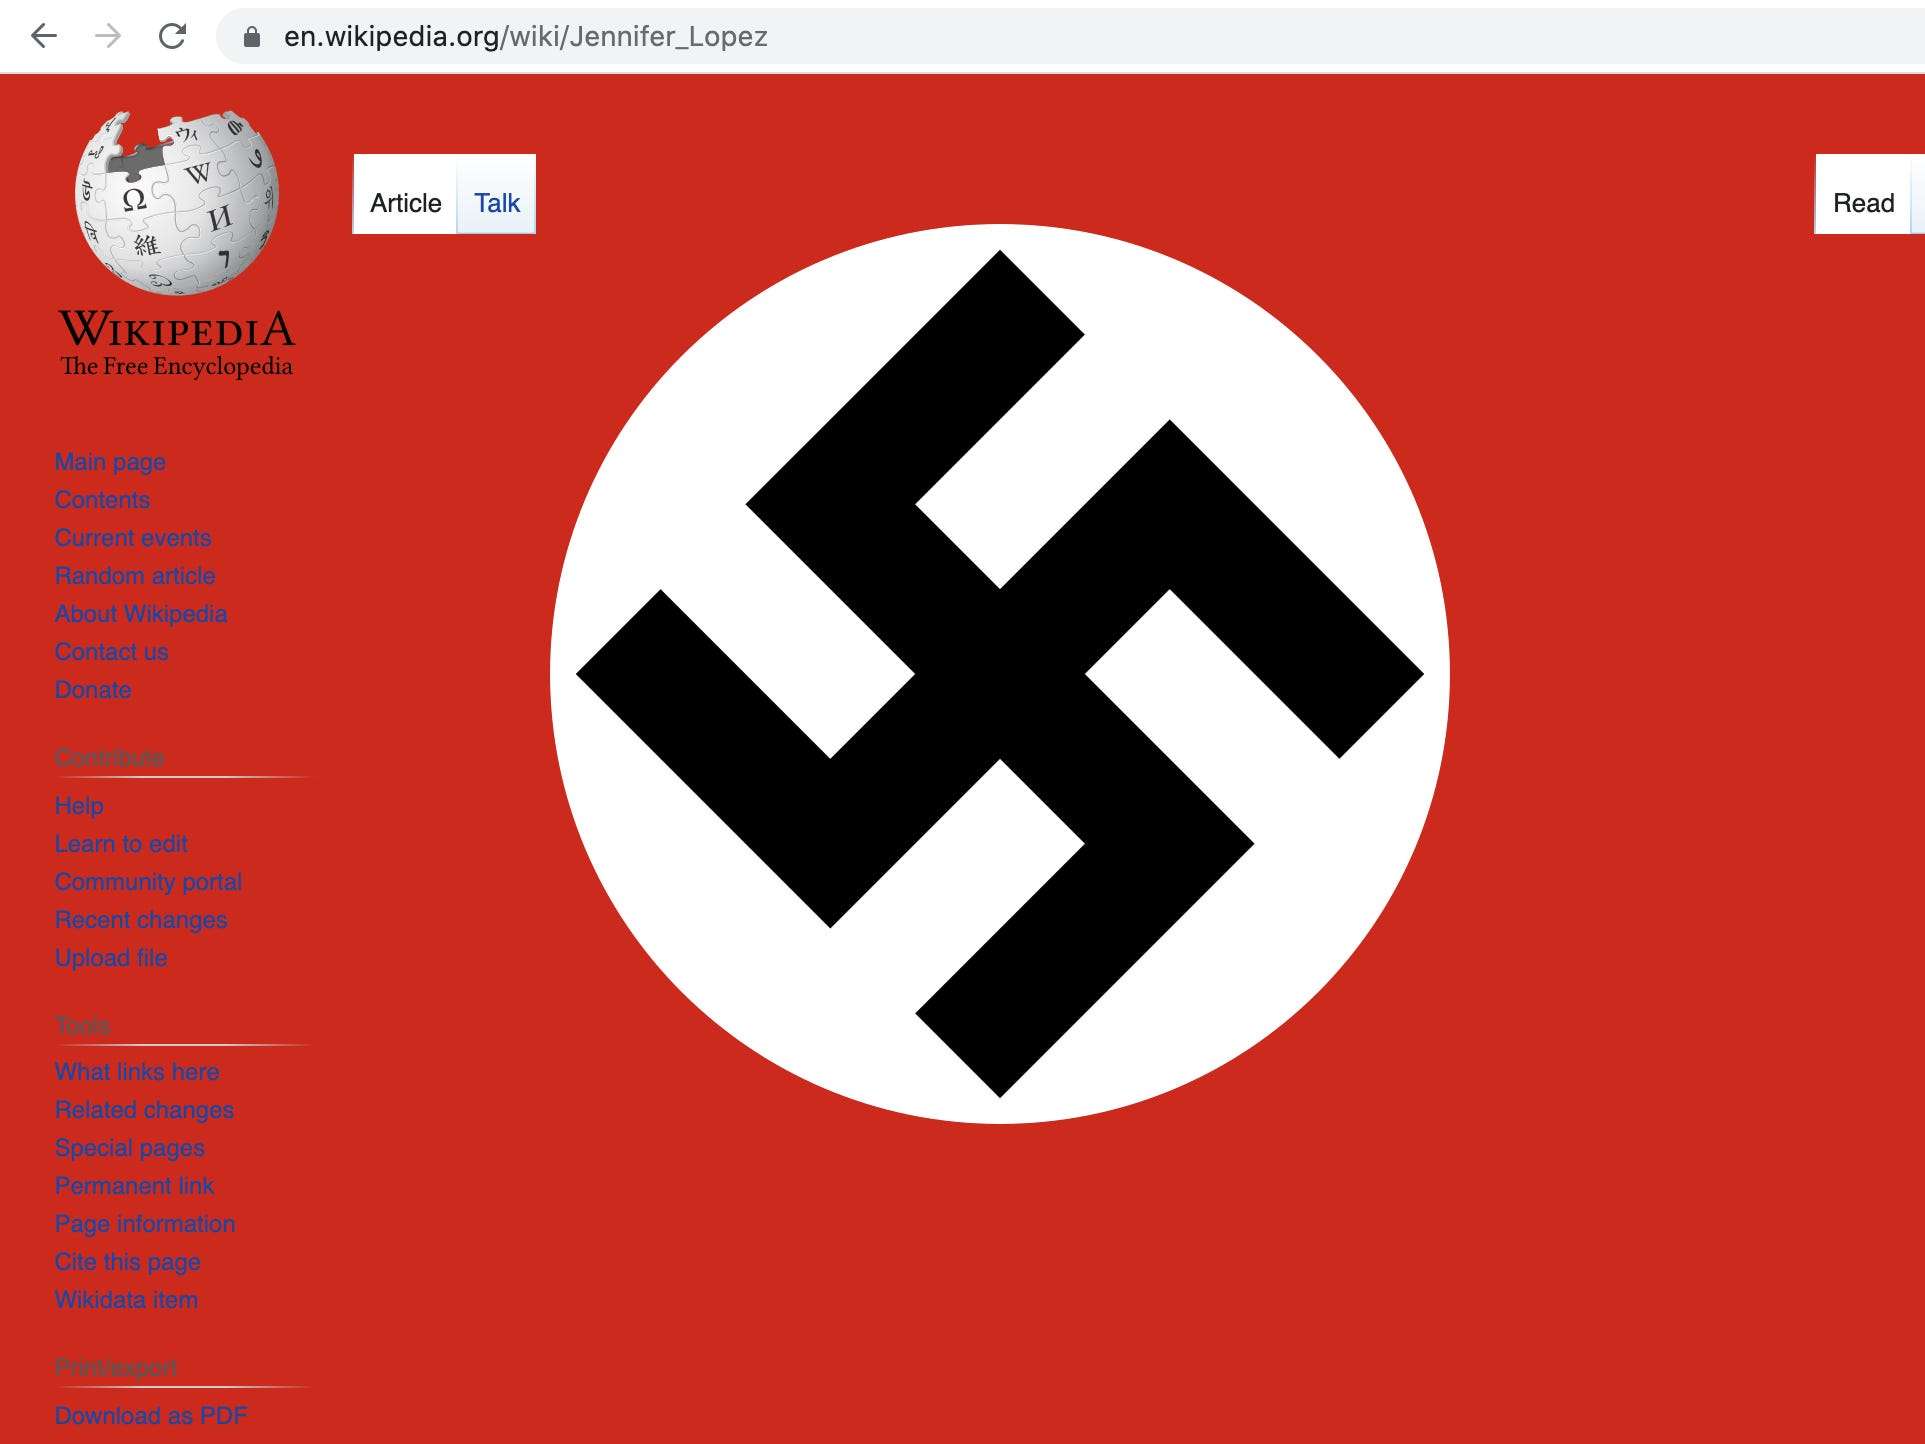 Pictures of Swastikas temporarily replaced Wikipedia pages for Jennifer  Lopez, Ben Affleck | Business Insider India